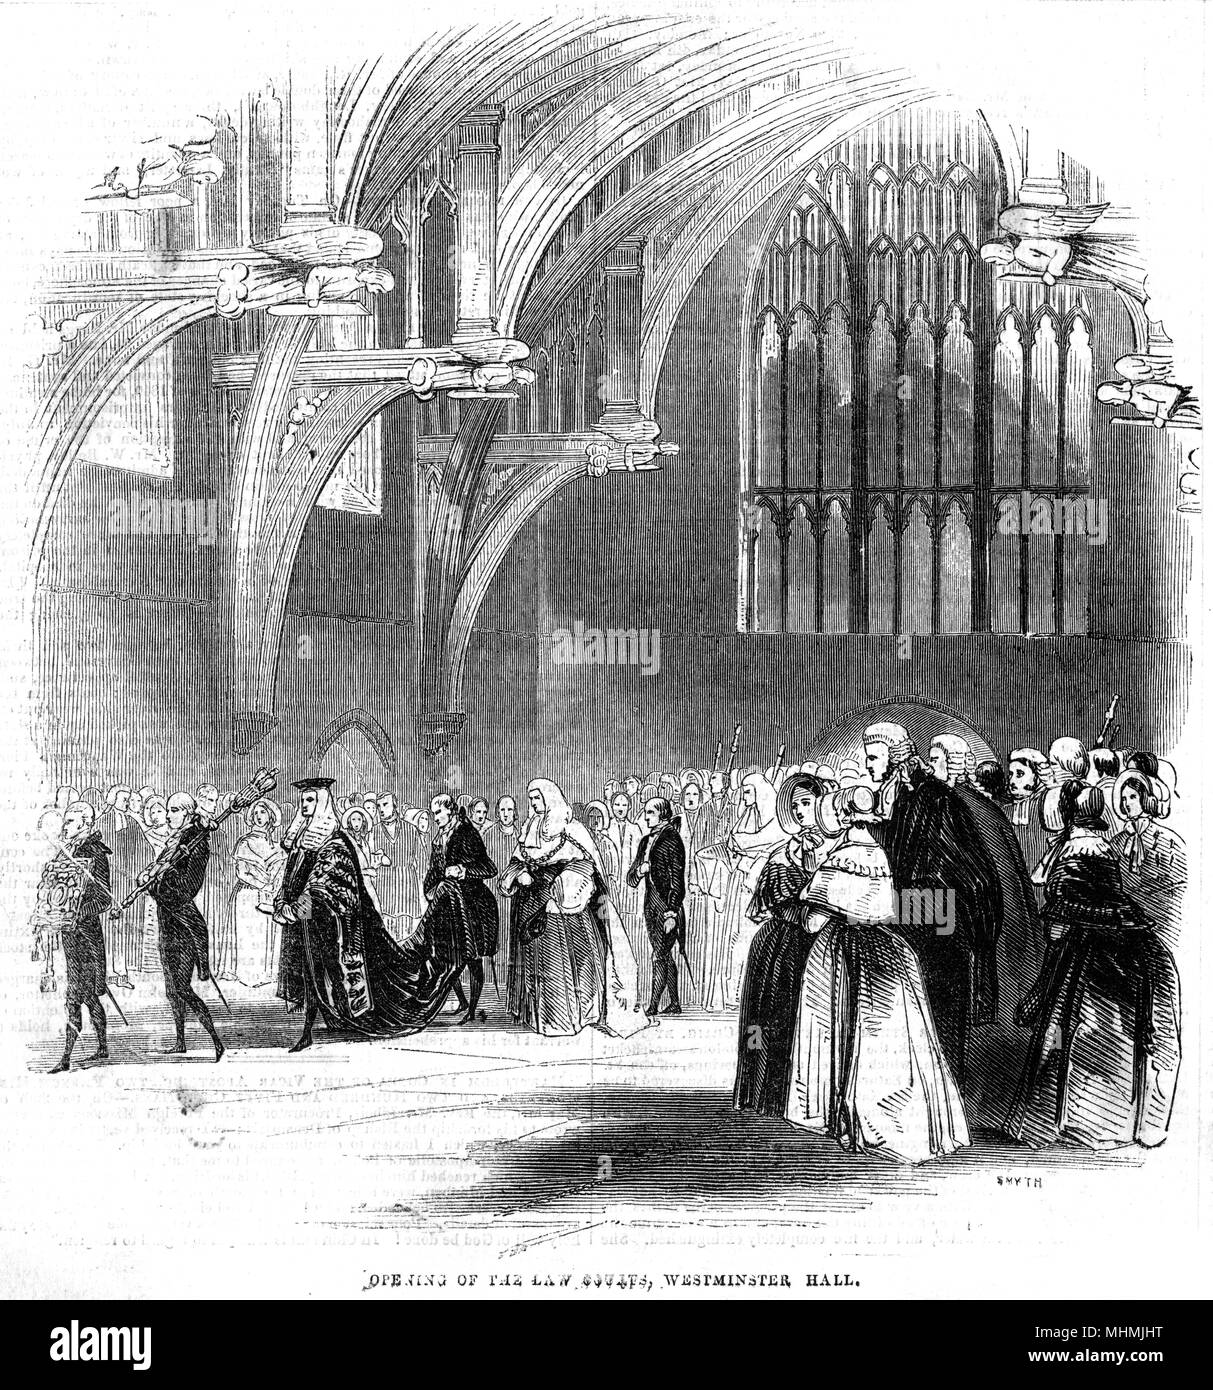 The judges' procession opens at Westminster Hall       Date: 1843 Stock Photo